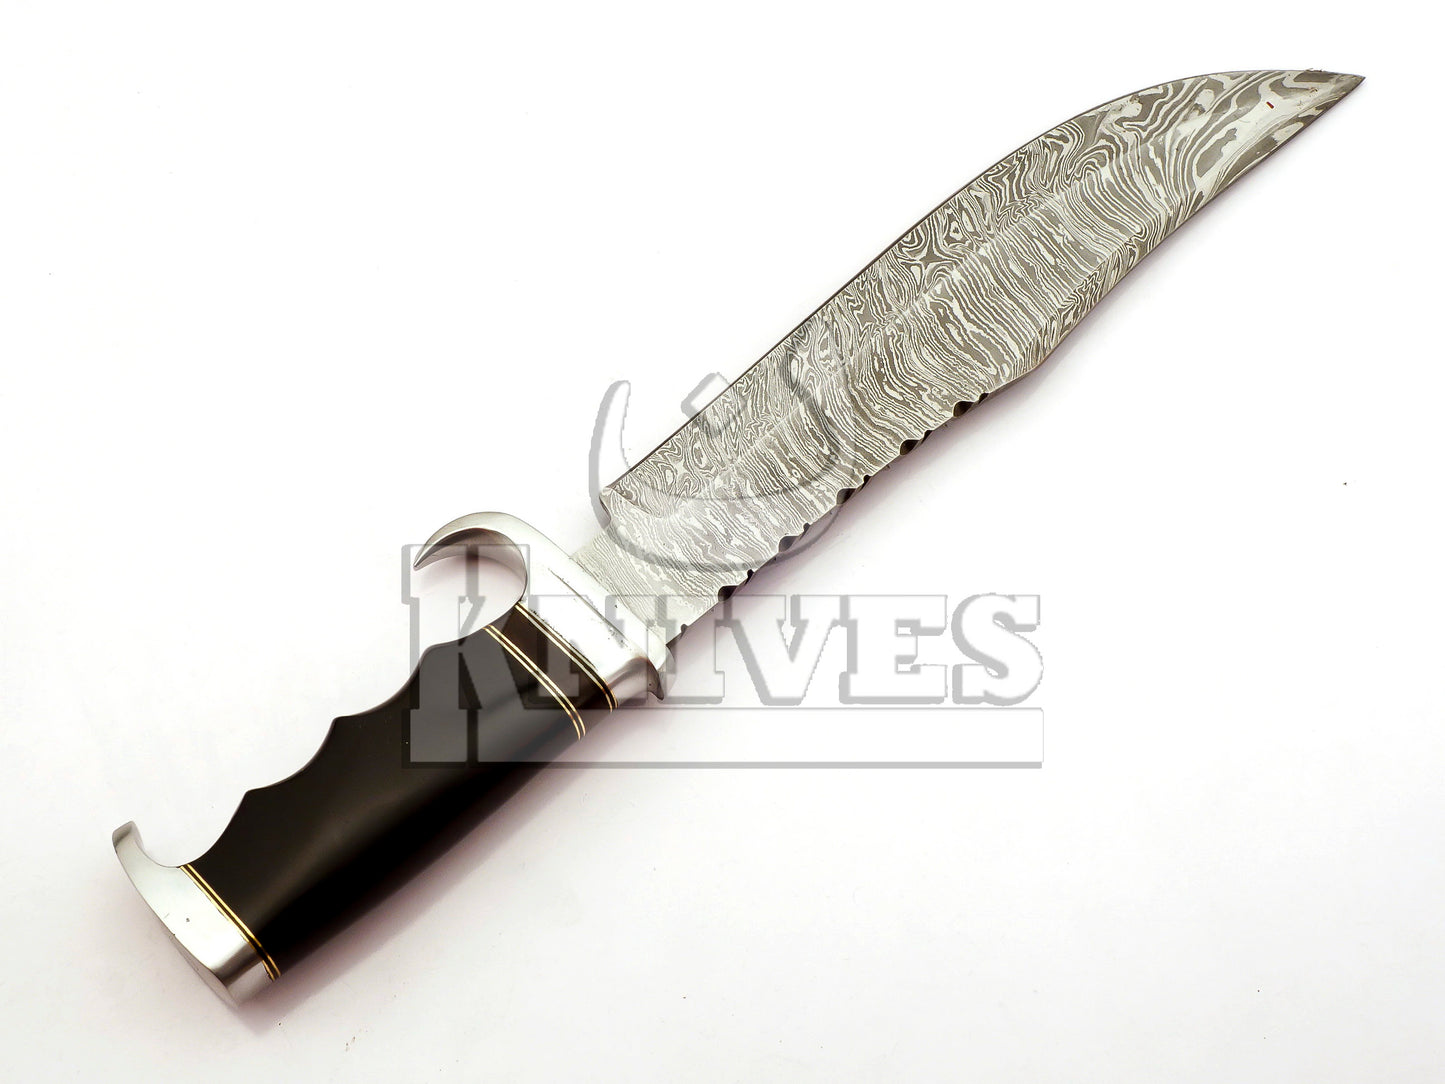 Damascus Steel Hunting Bowie with Bull Horn Handle